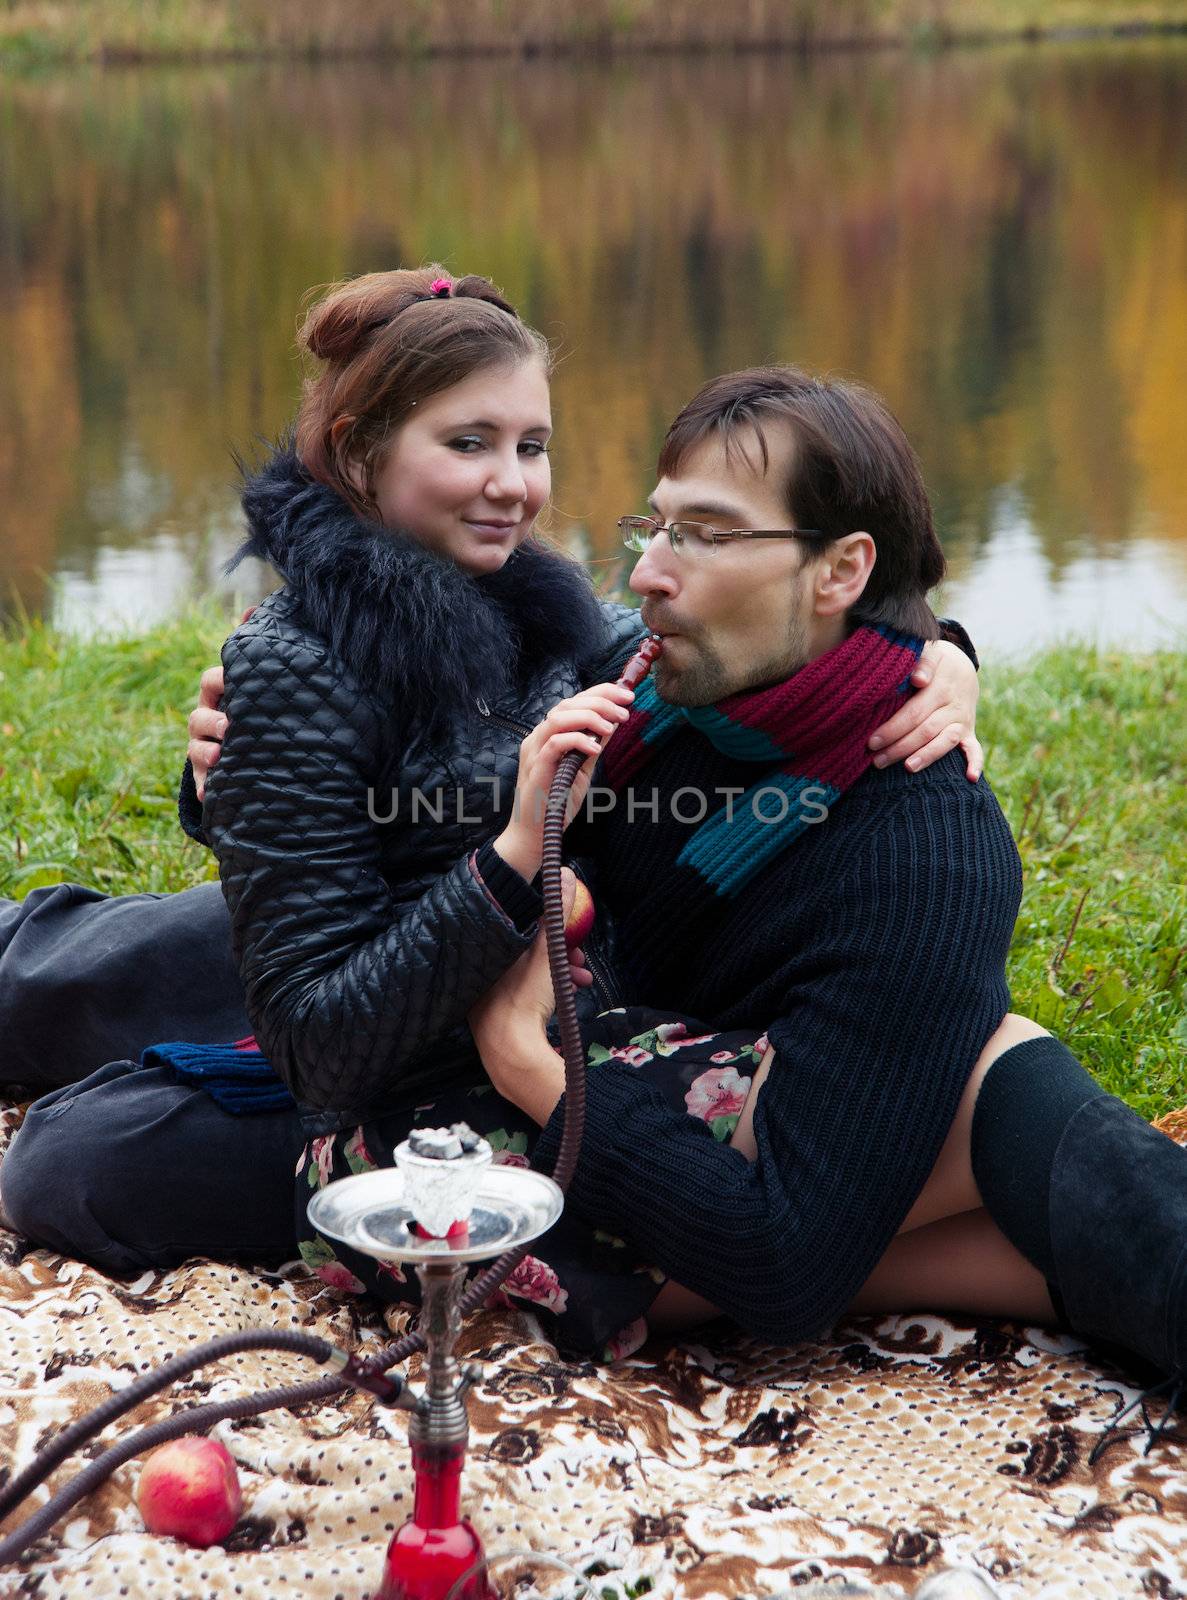 relationship between man and a woman at a picnic with a hookah